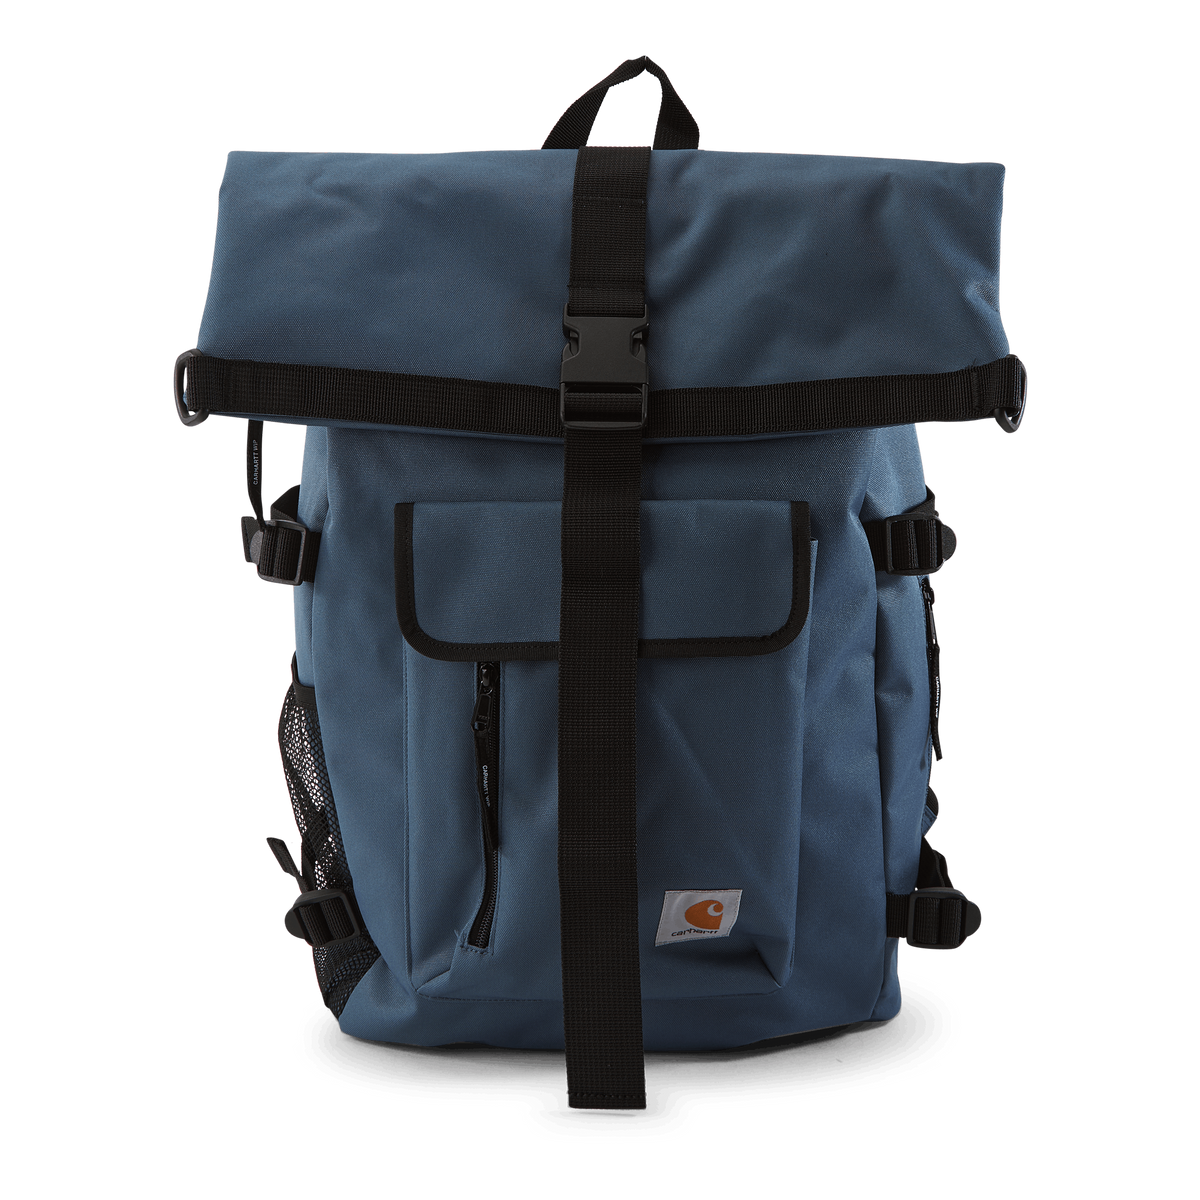 Carhartt WIP Philis Backpack In Blue – Store, 46% OFF